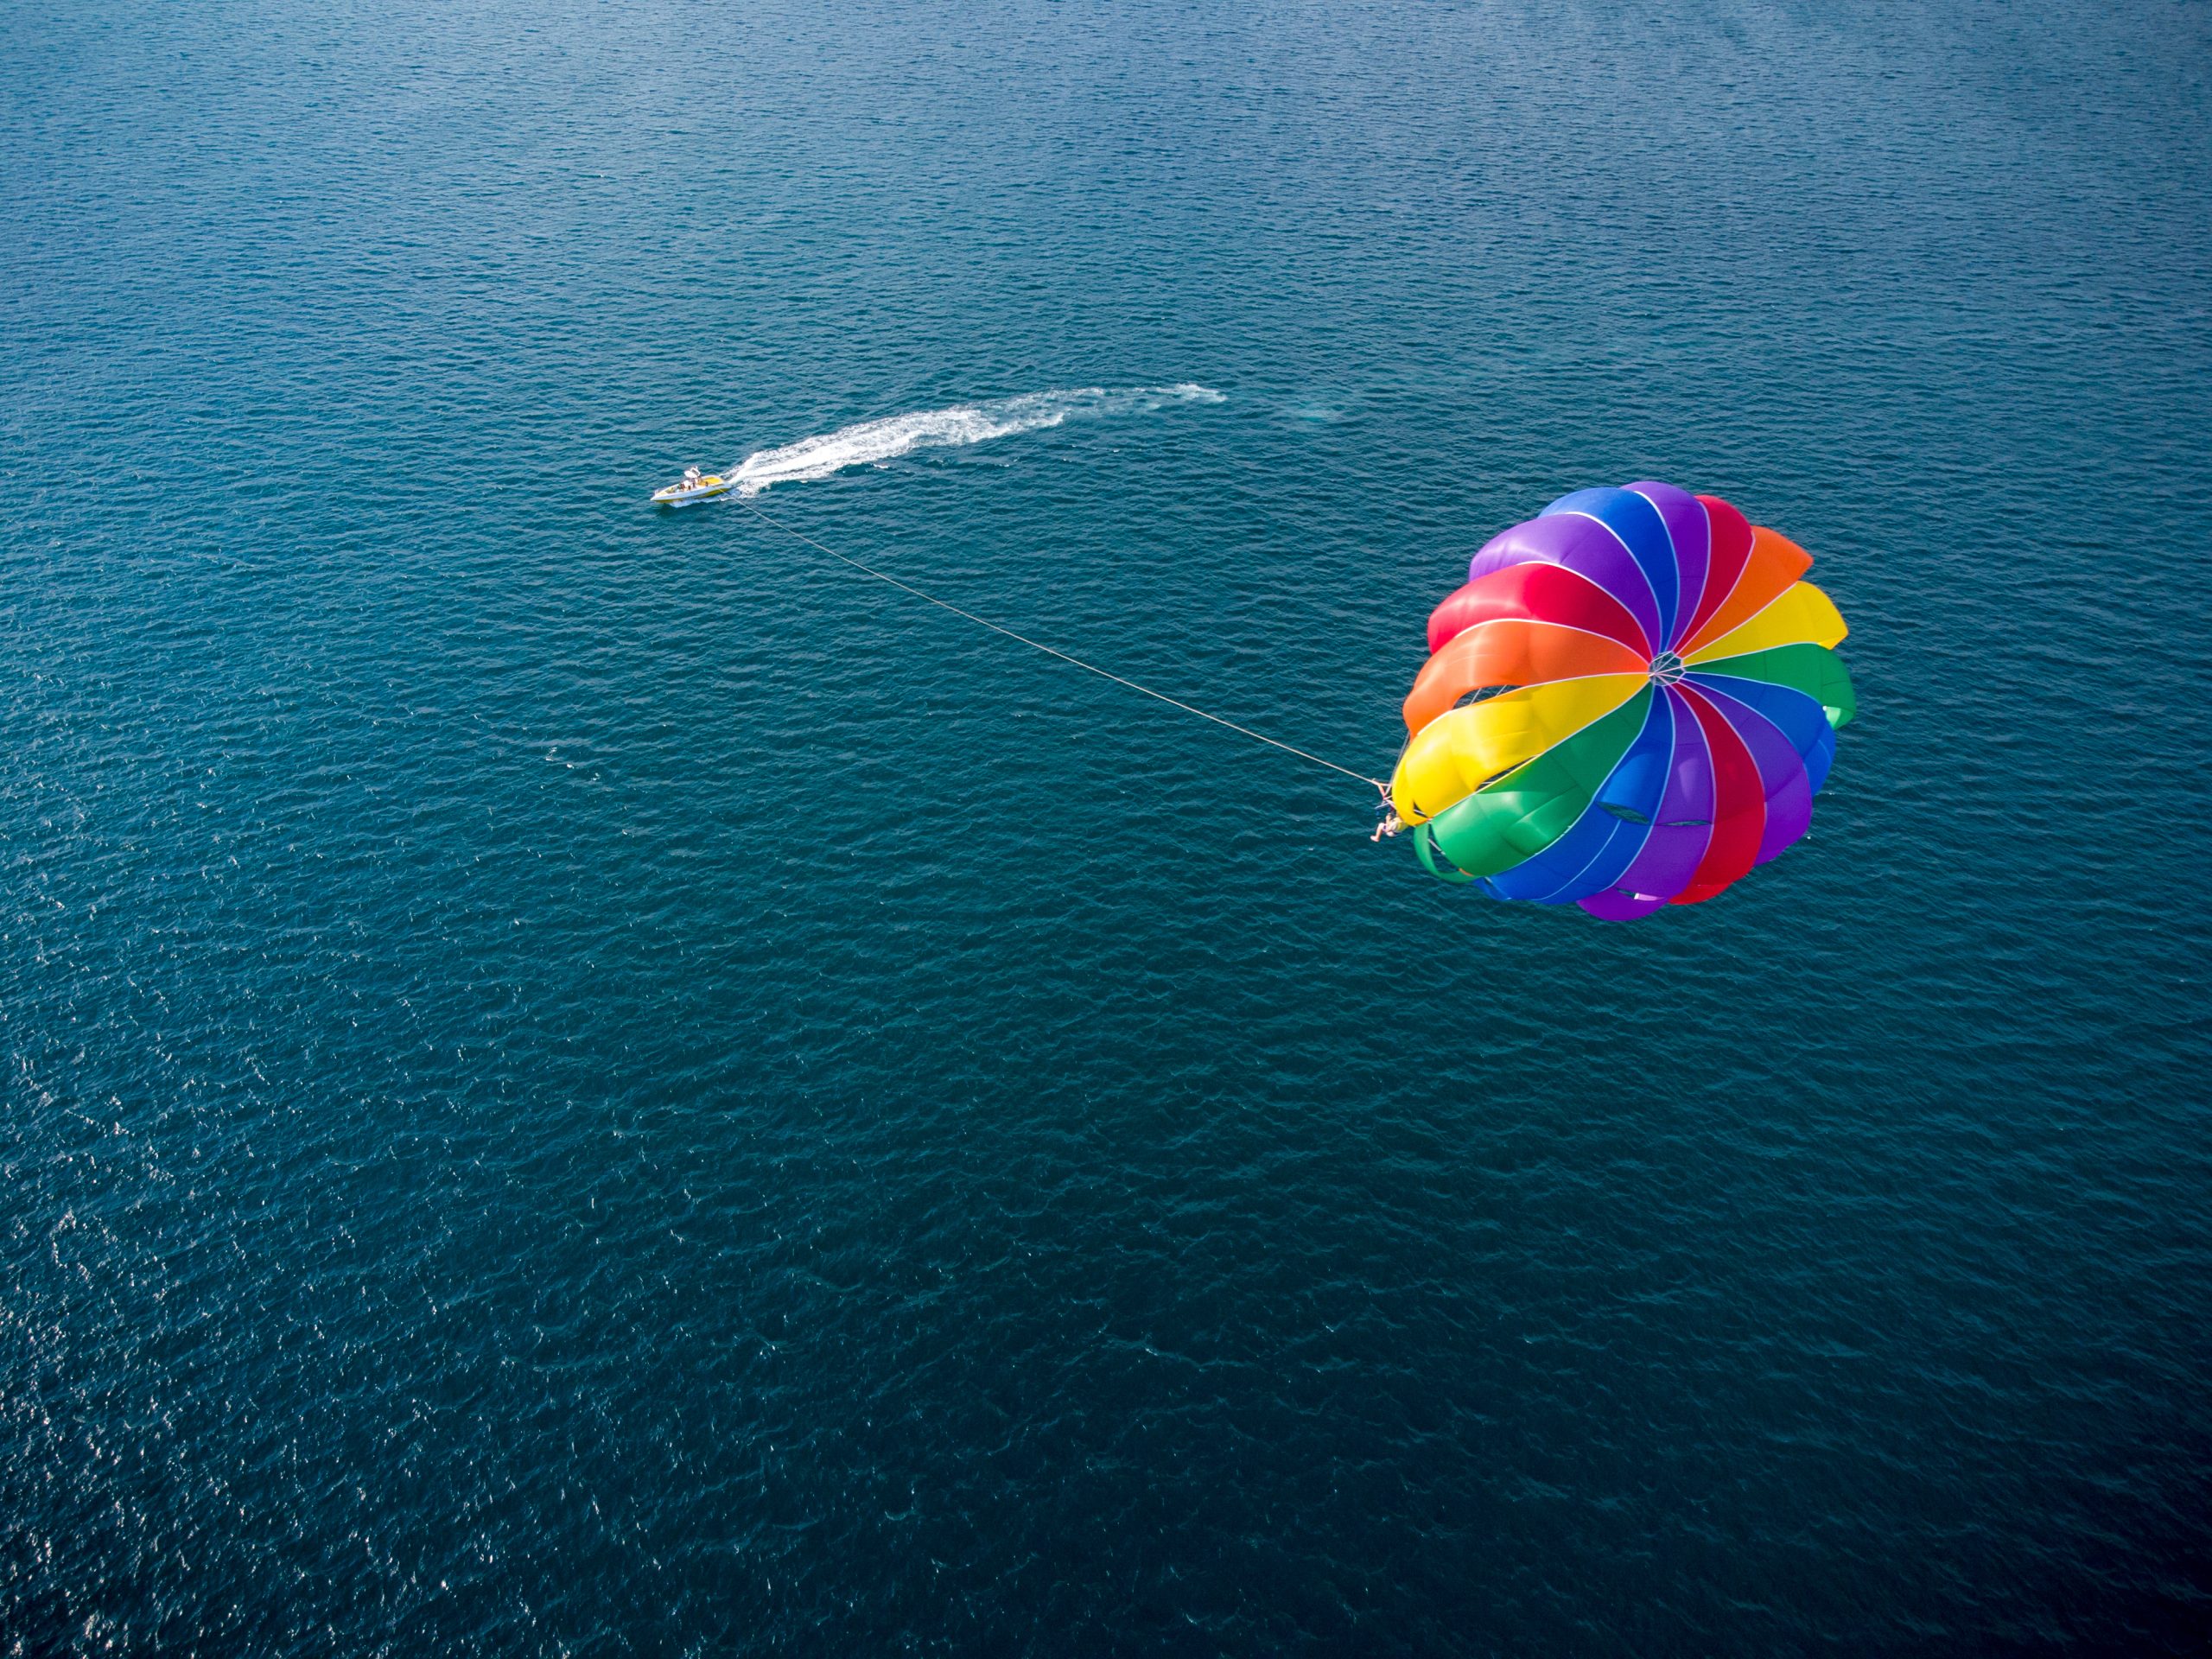 A tow boat is seen pulling along a person who is parasailing.